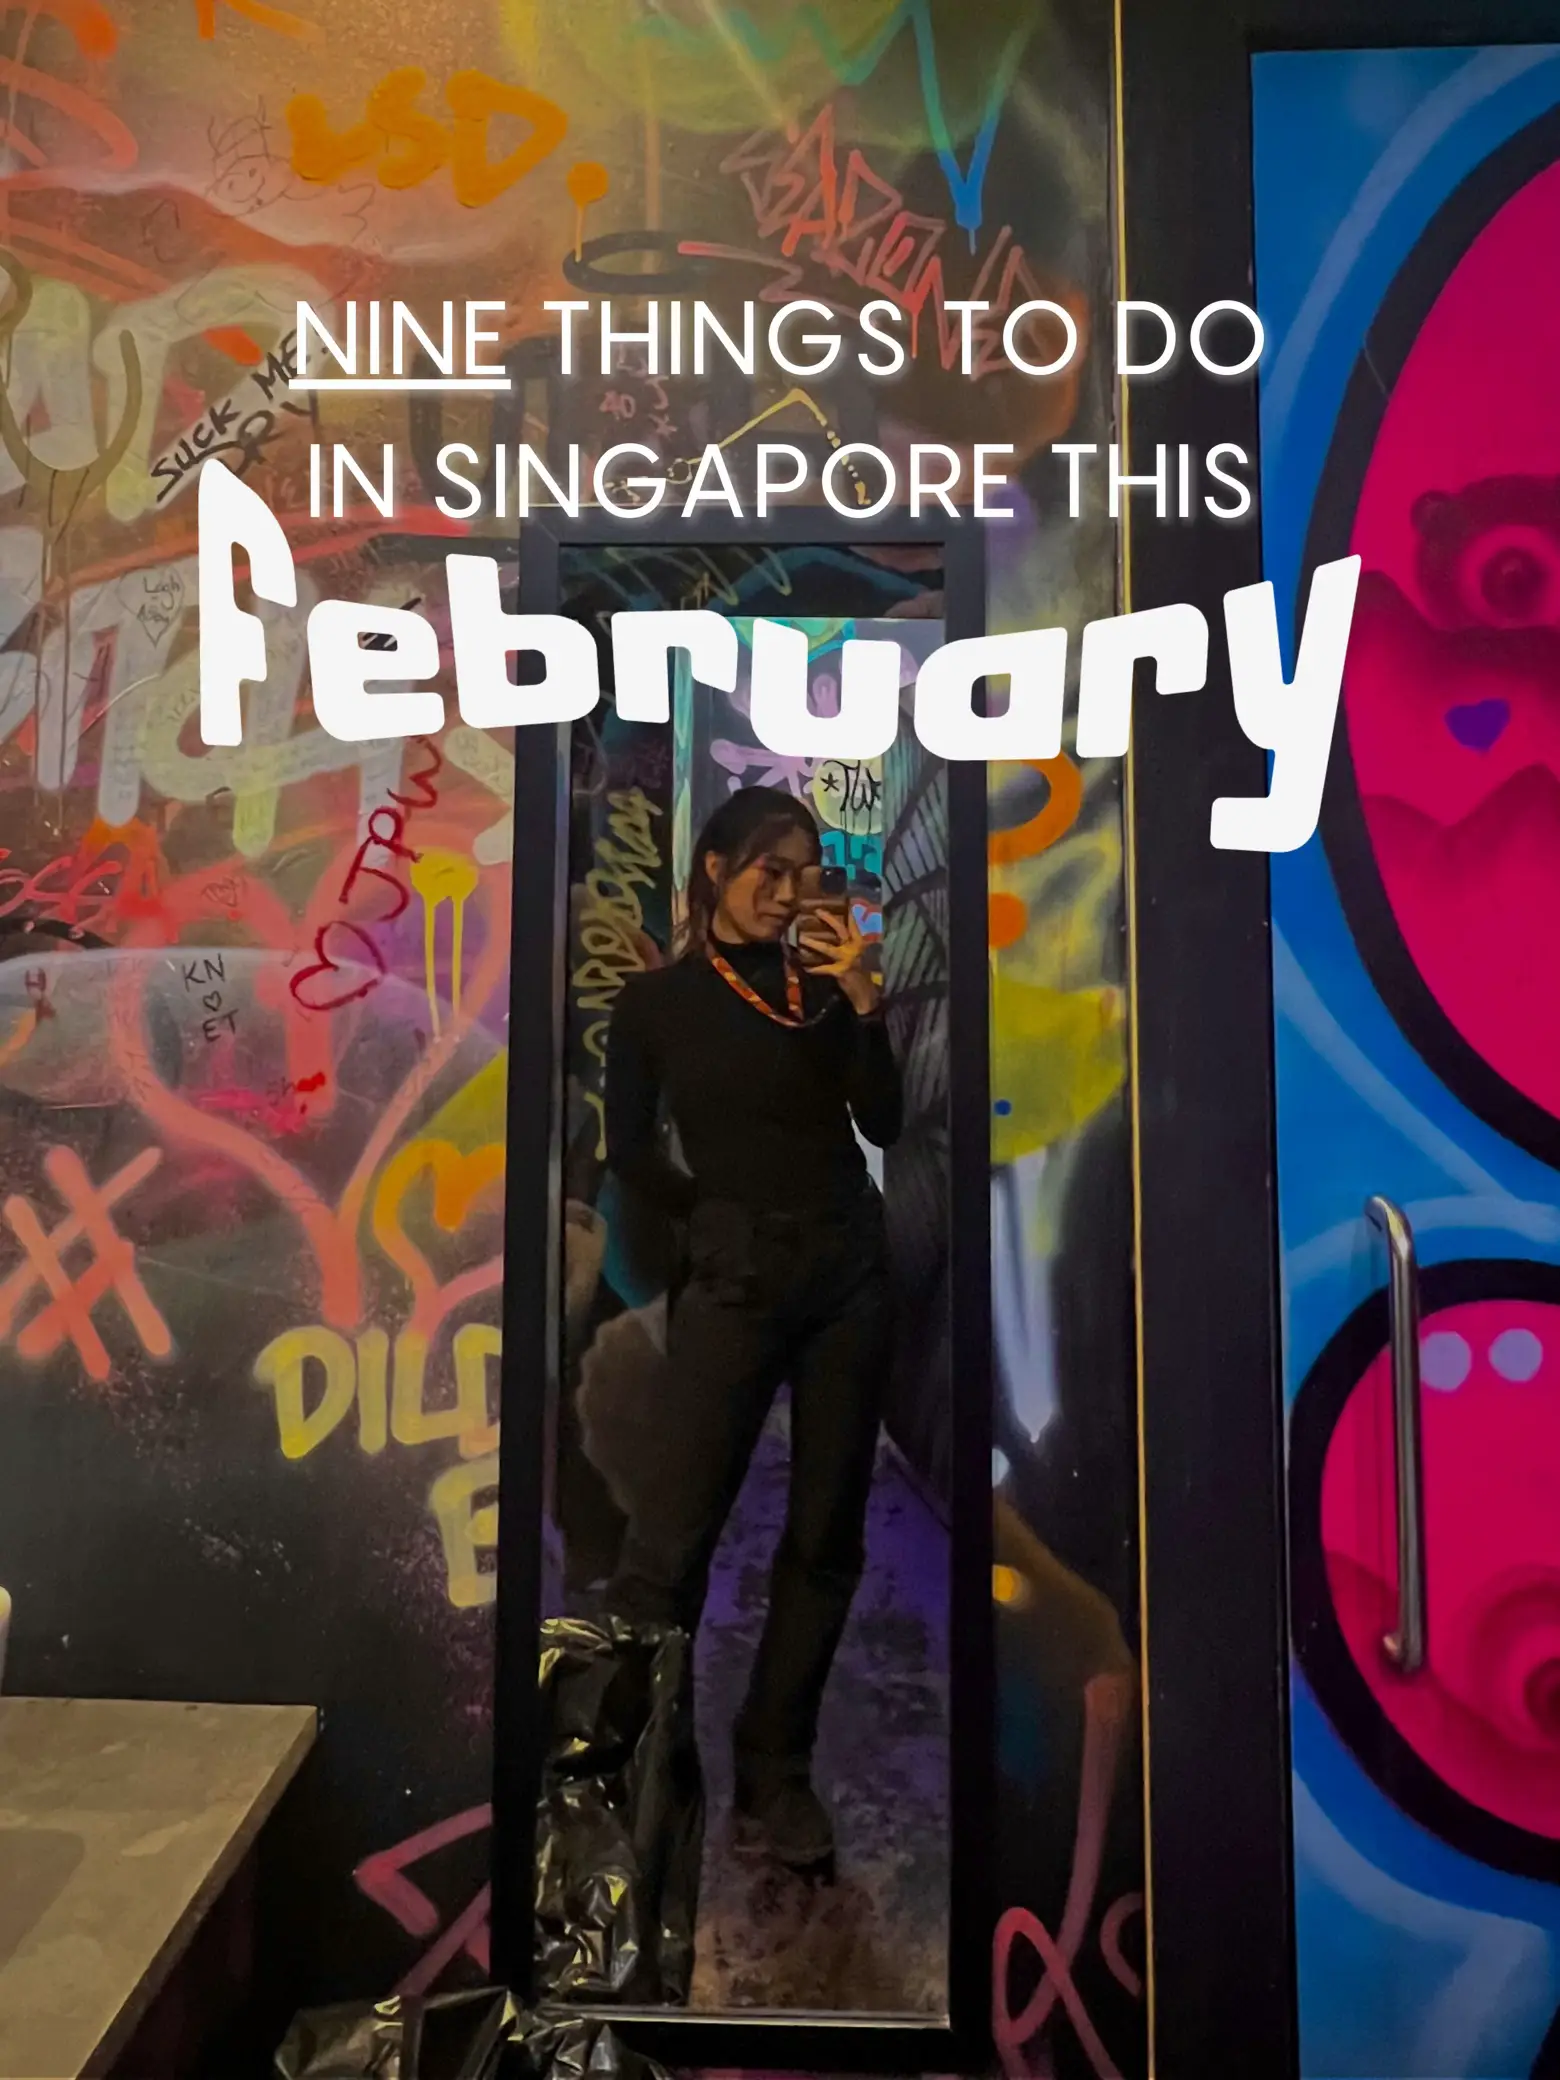 9 THINGS TO DO IN SG FOR FEBRUARY 🧧's images(0)